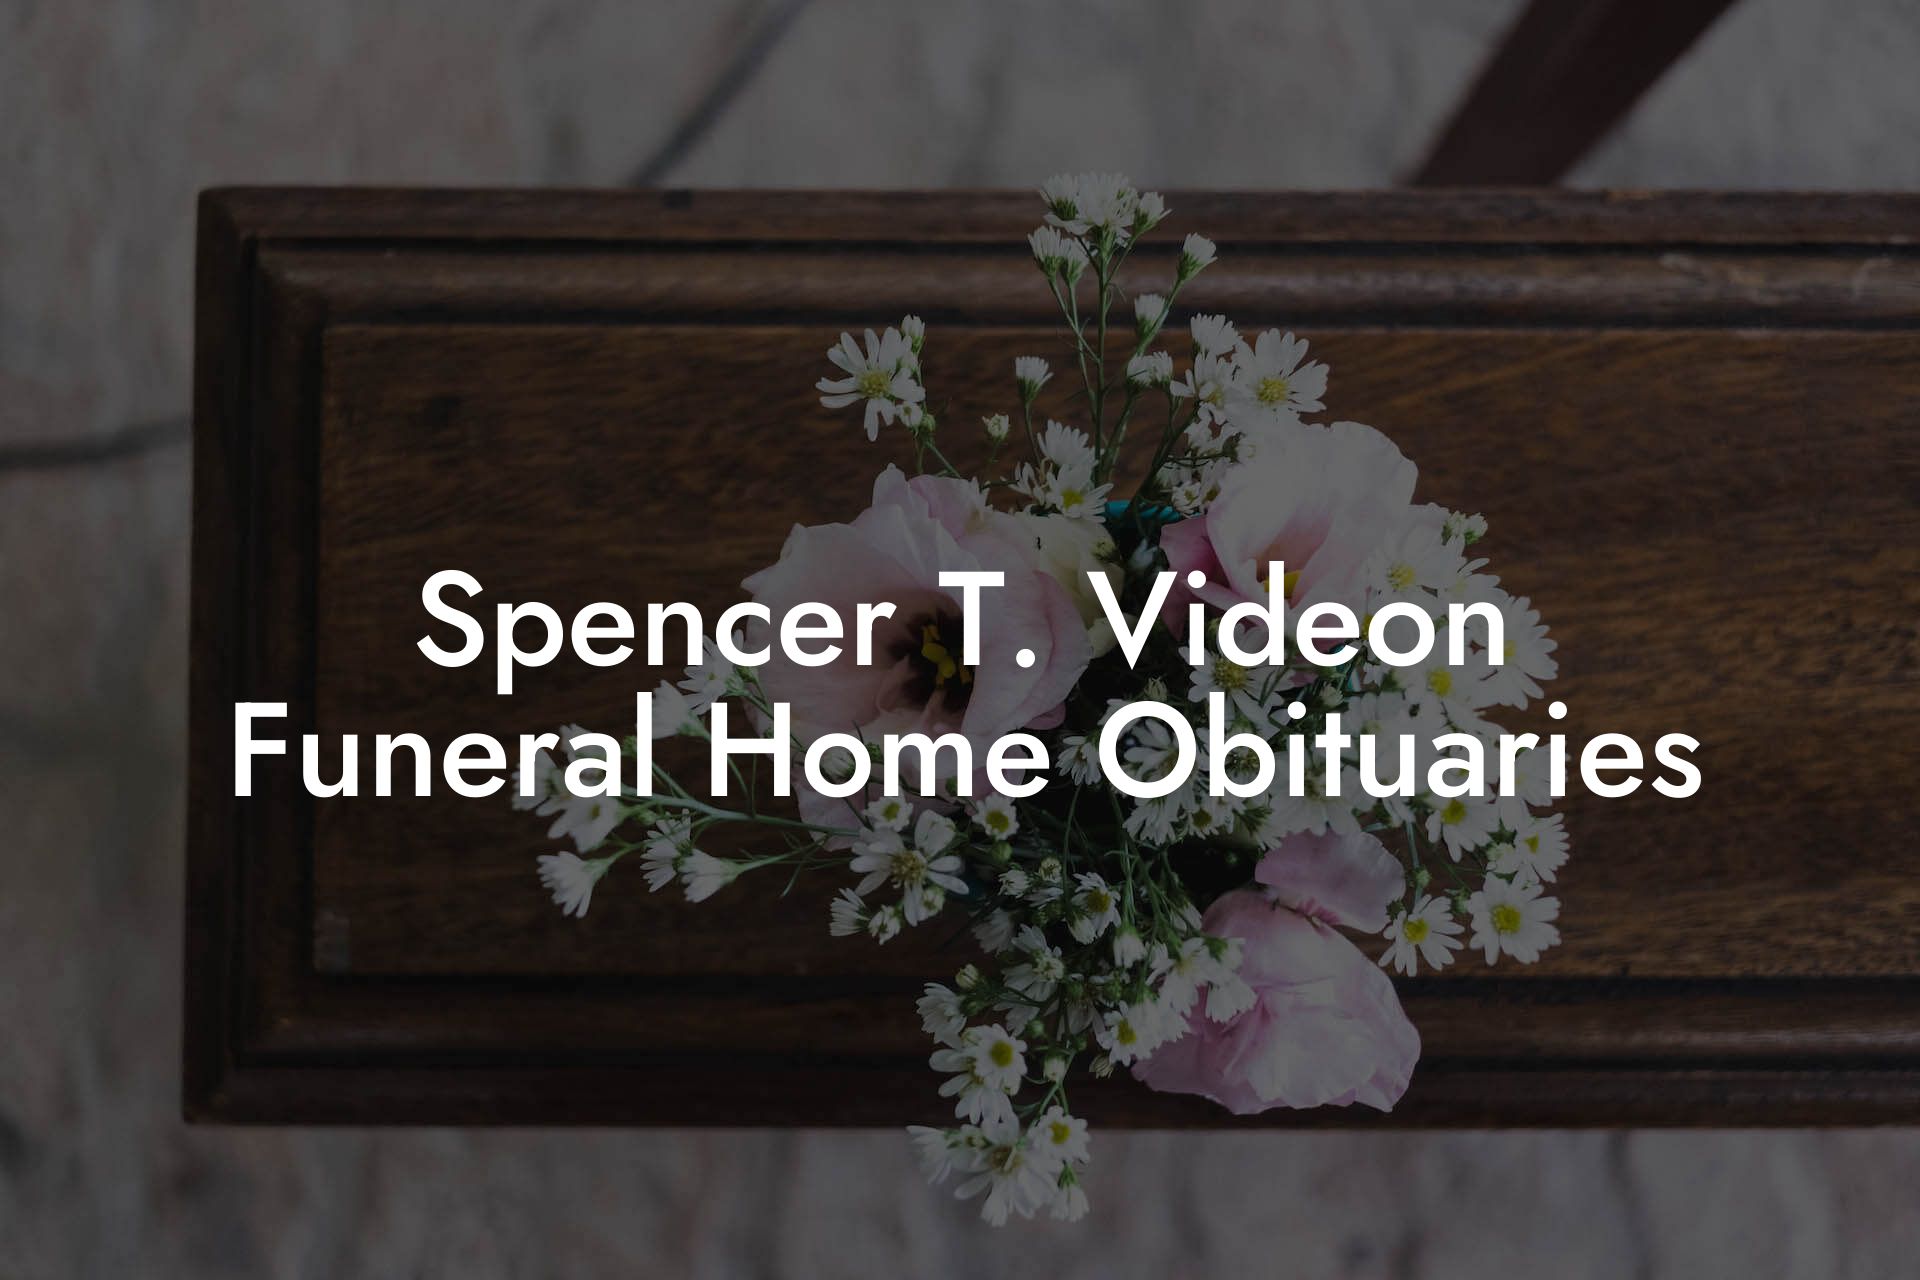 Spencer T. Videon Funeral Home Obituaries